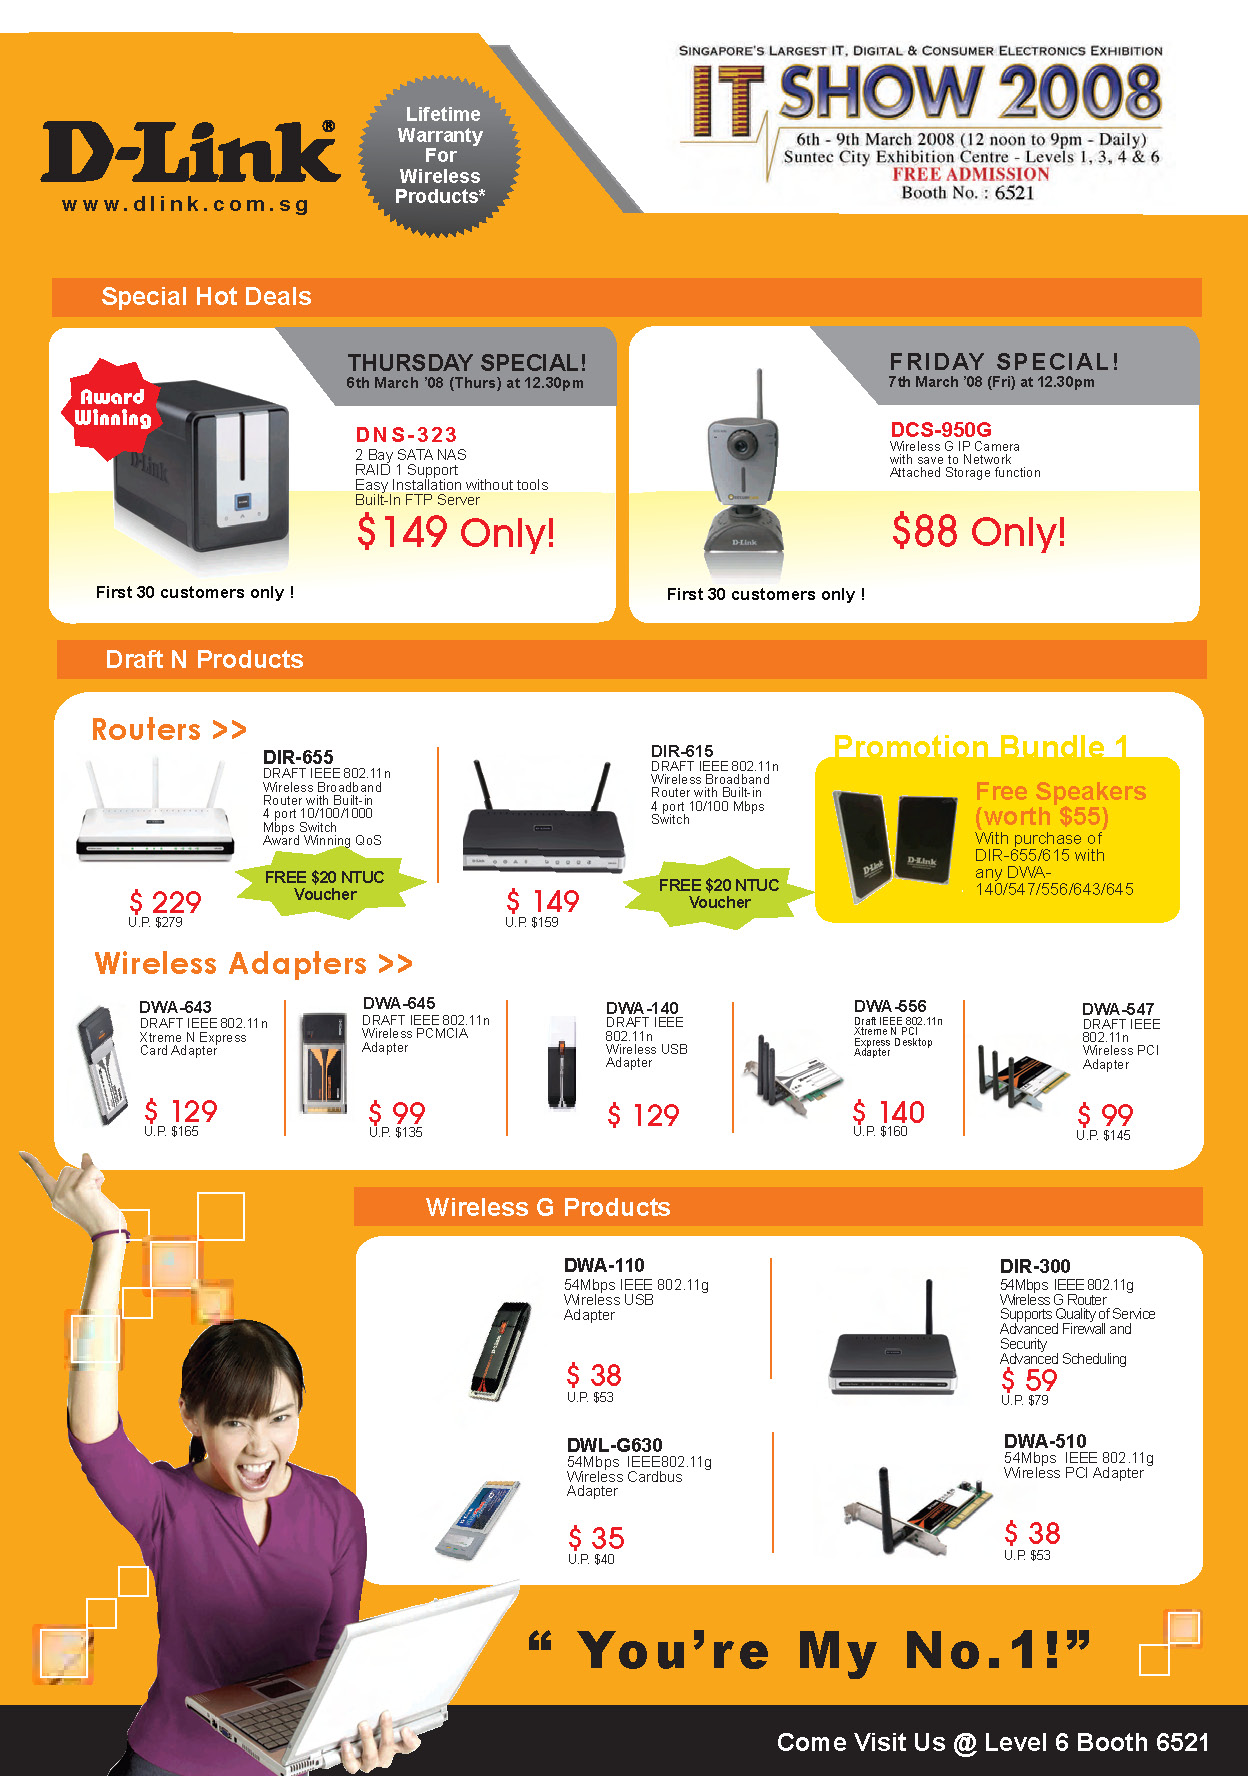 IT Show 2008 price list image brochure of D-Link SATA NAS Wireless G IP Camera Routers Wireless Adapters DIR DWA DWA